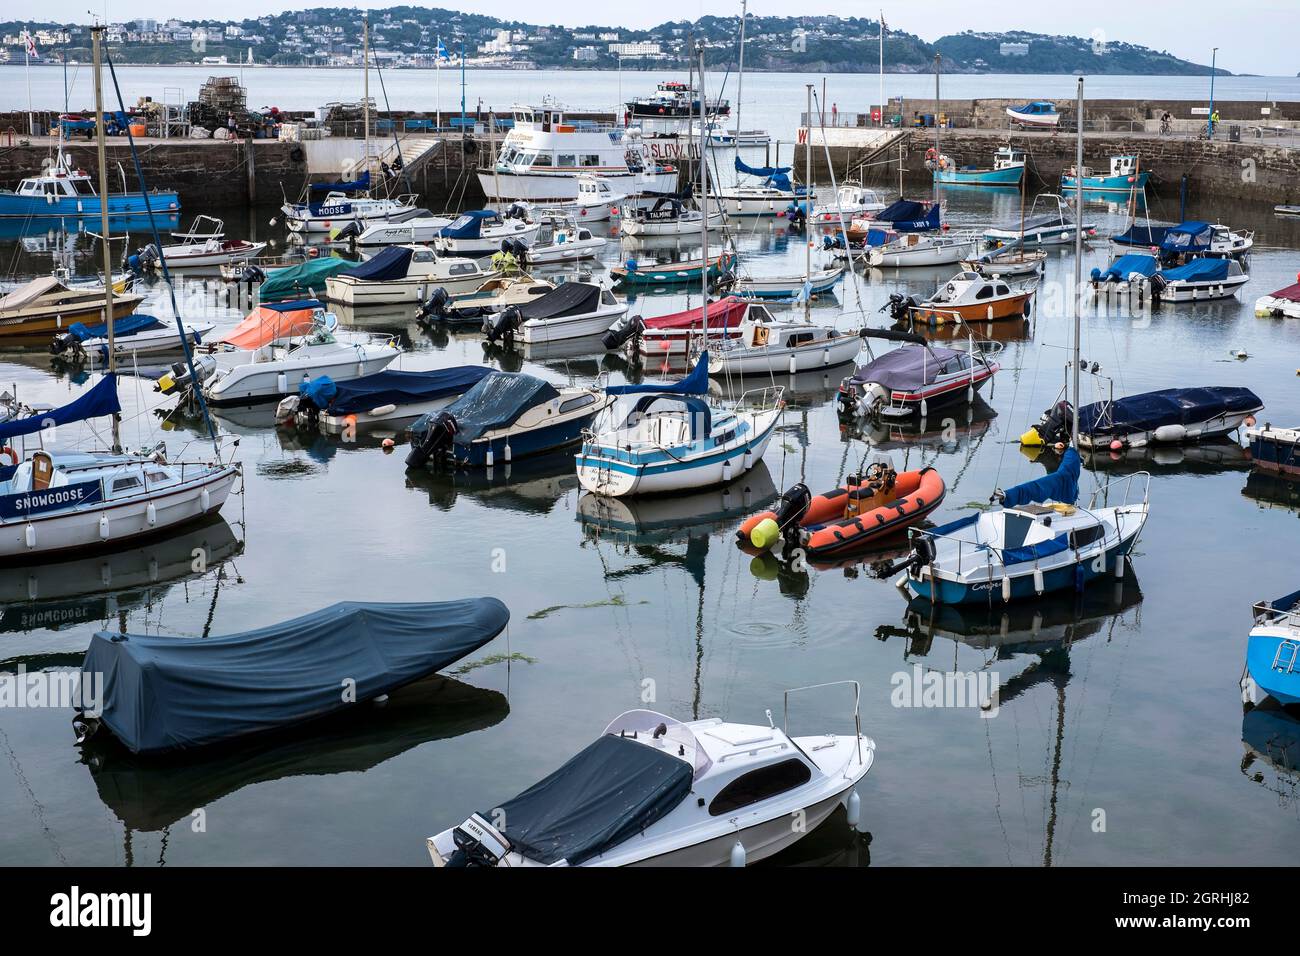 Boats in the harbour in Brixham, Devon, England Stock Photo